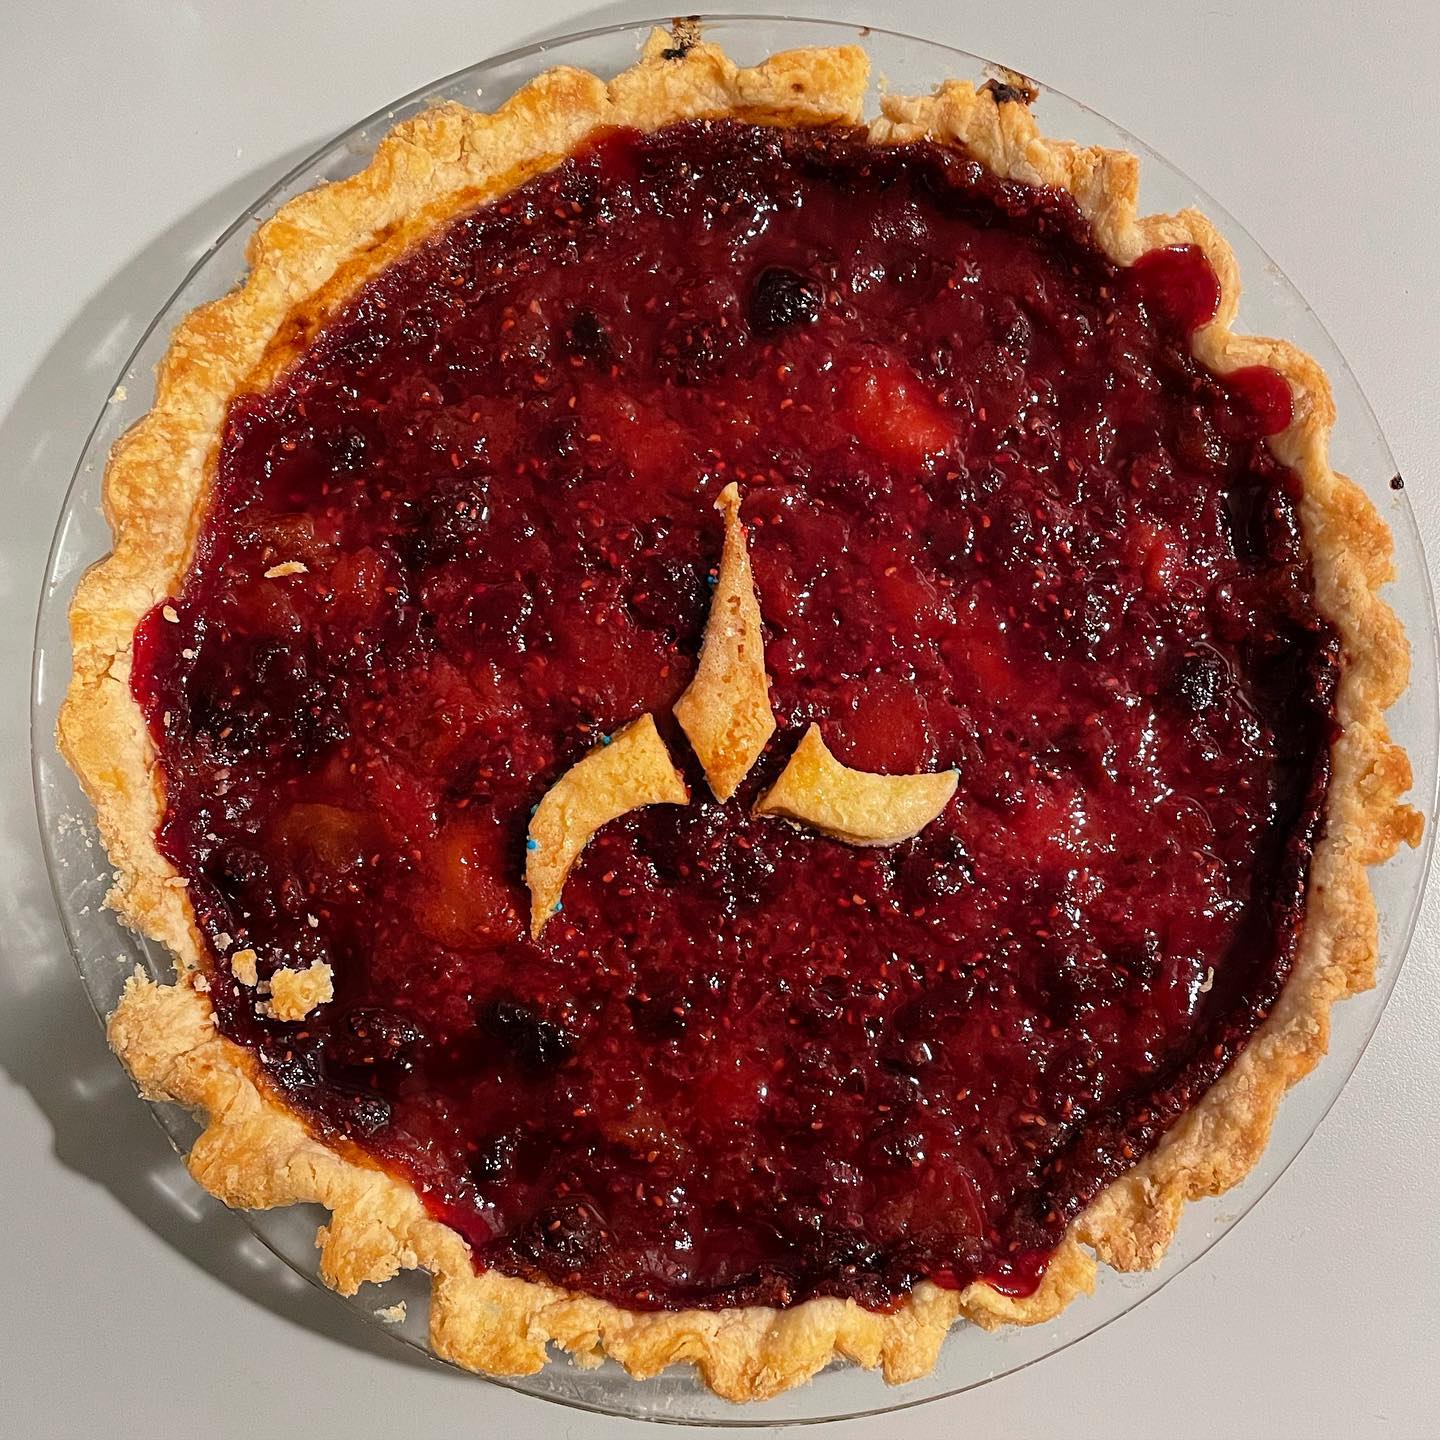 One of our players made Klingon pie for our watching party last night. Dunqu'! @startrek @modiphius